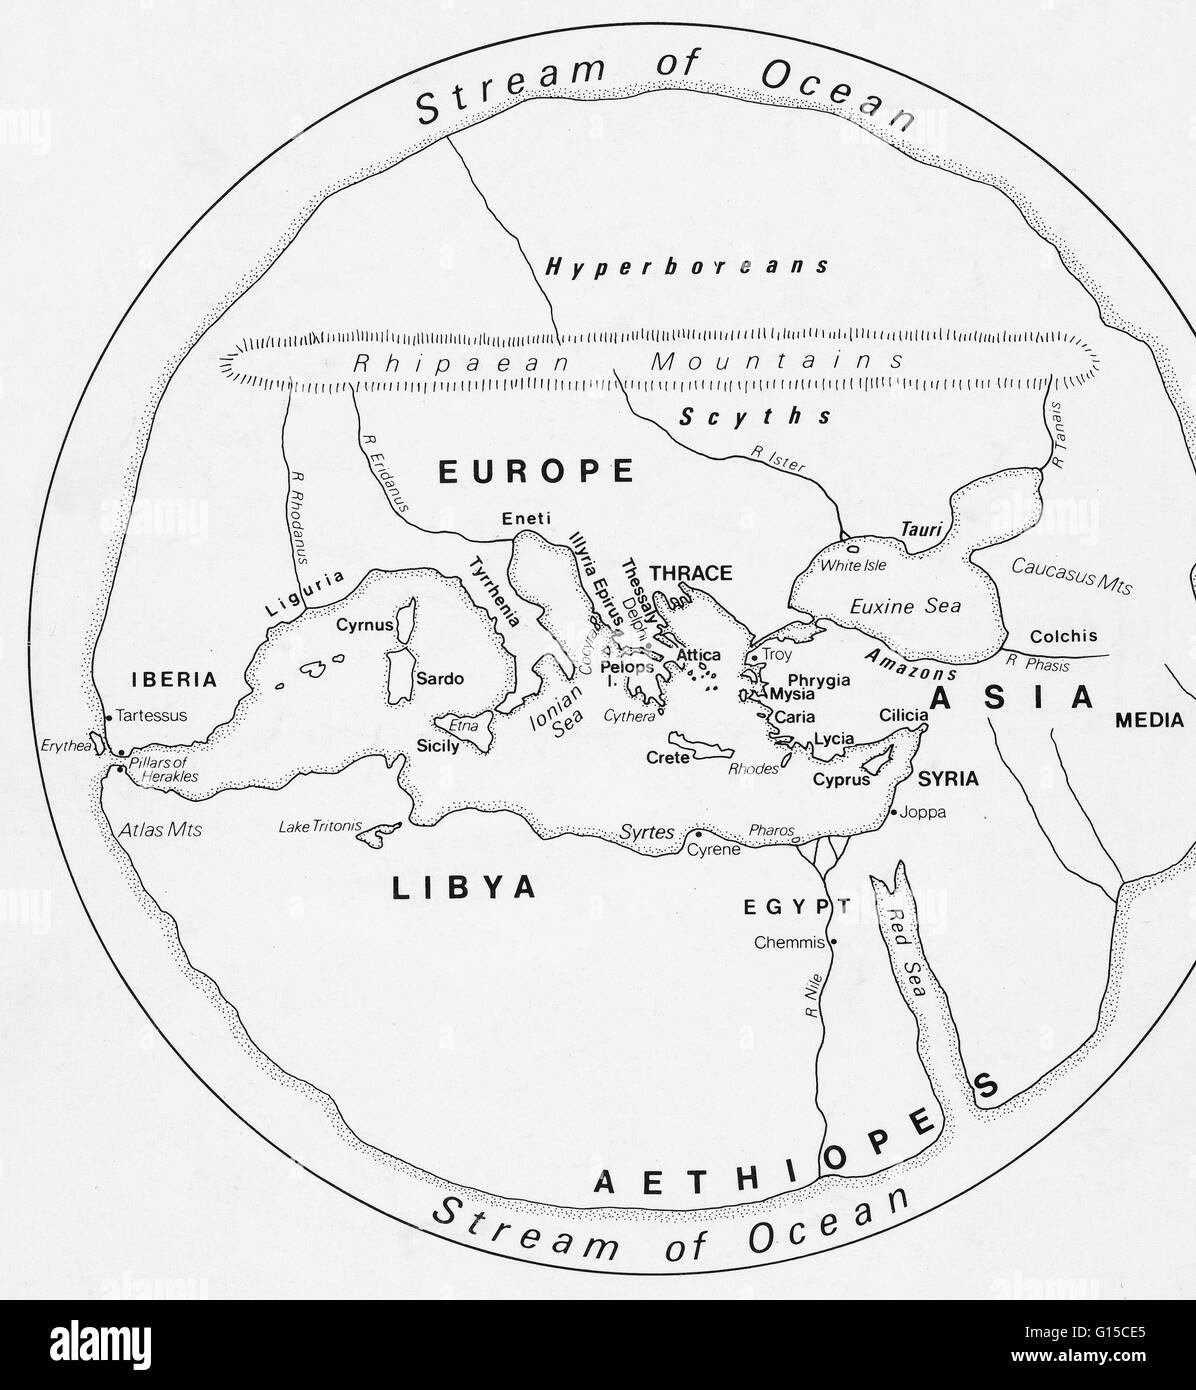 Ancient map of Europe, North Africa and the Middle East. Stock Photo